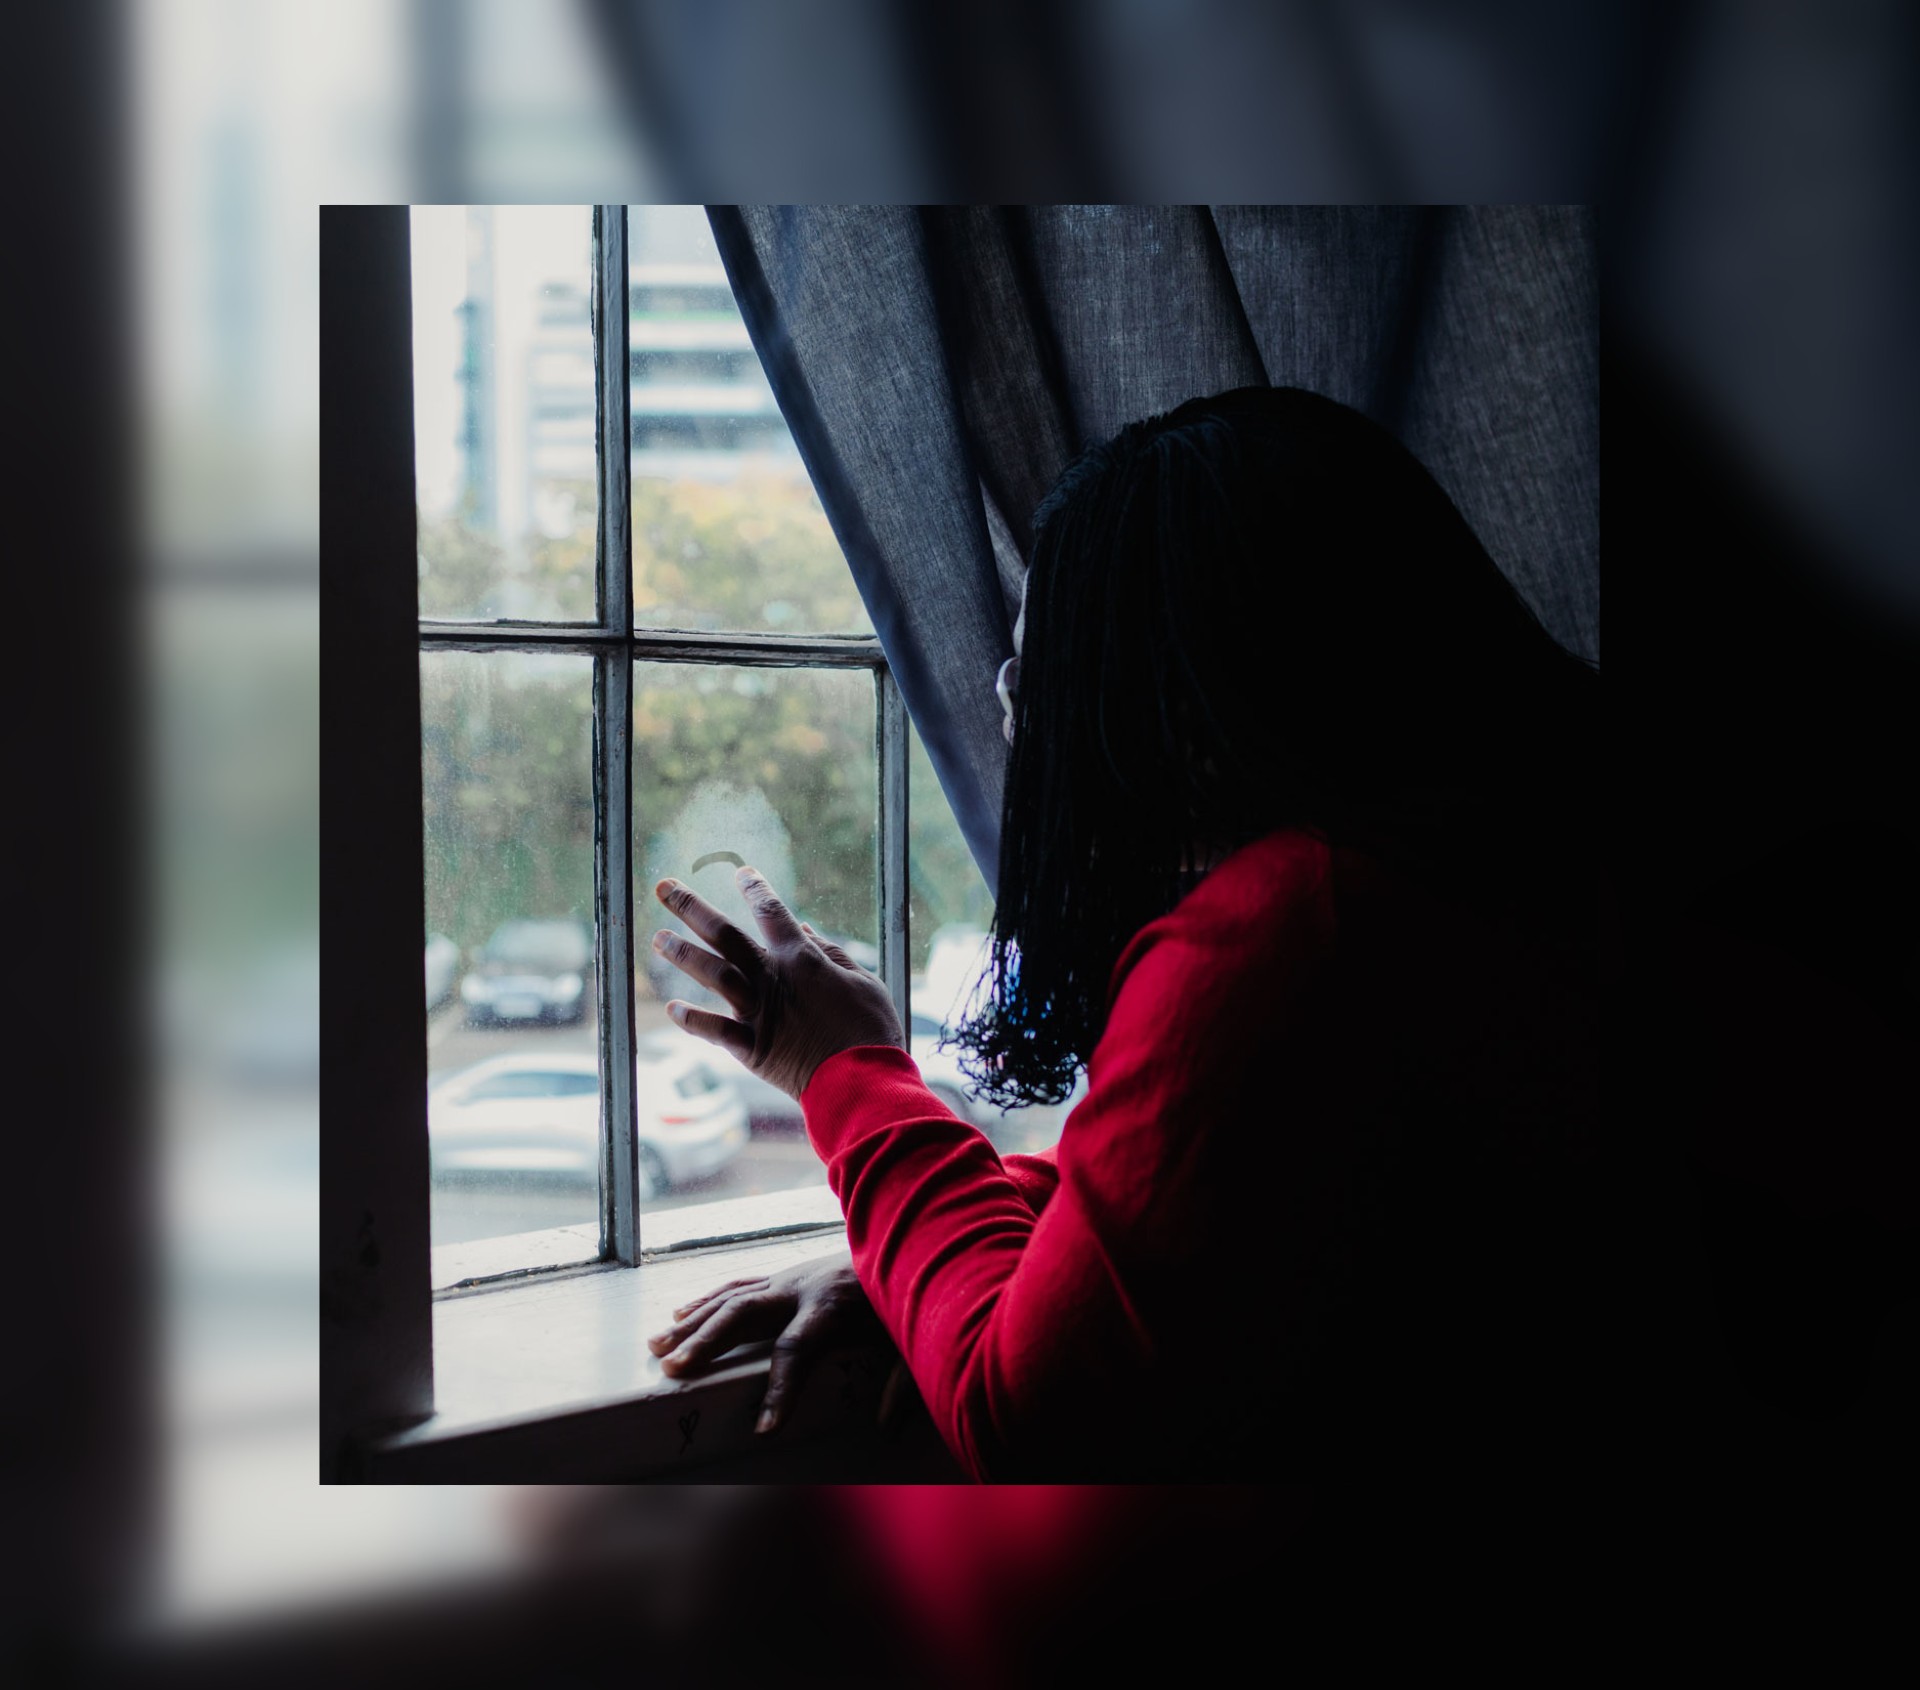 Woman with dark hair and red top staring through a window